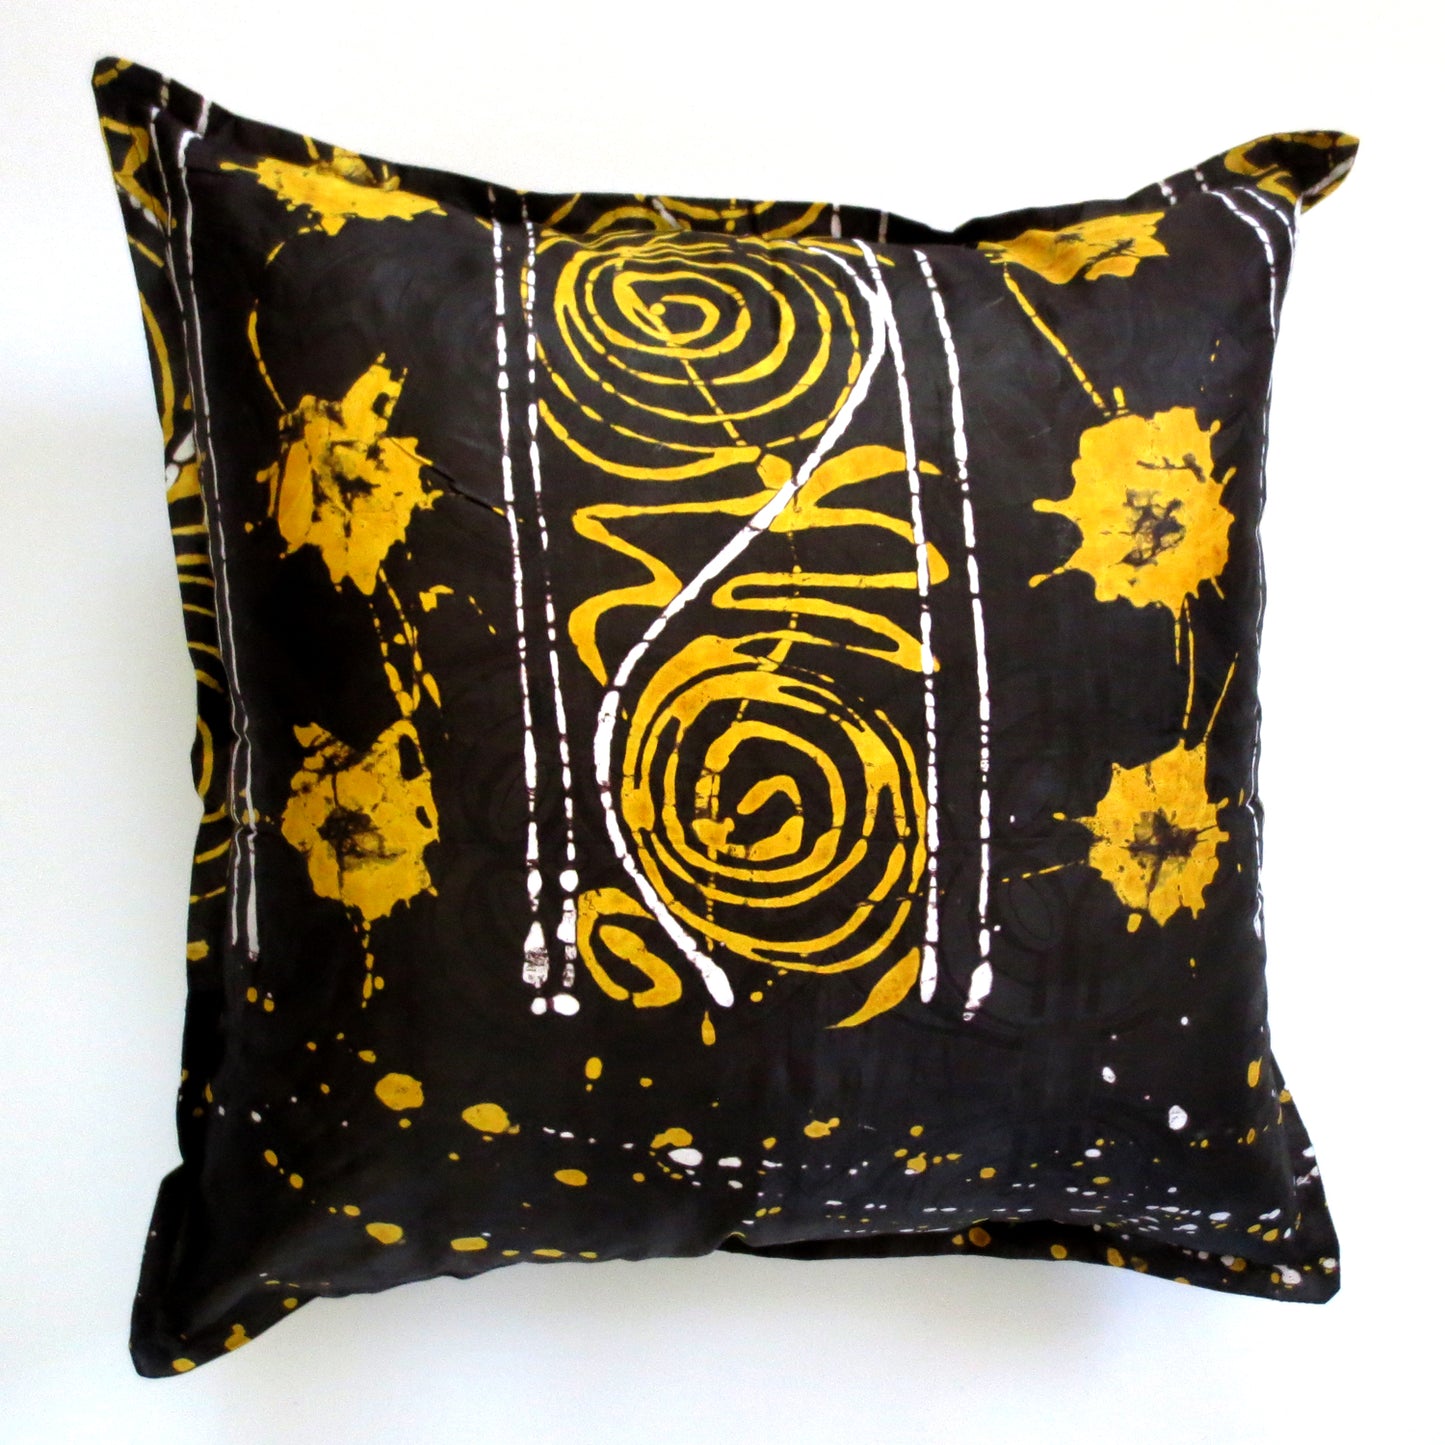 Gold Dust 20x20 Pillow Cover